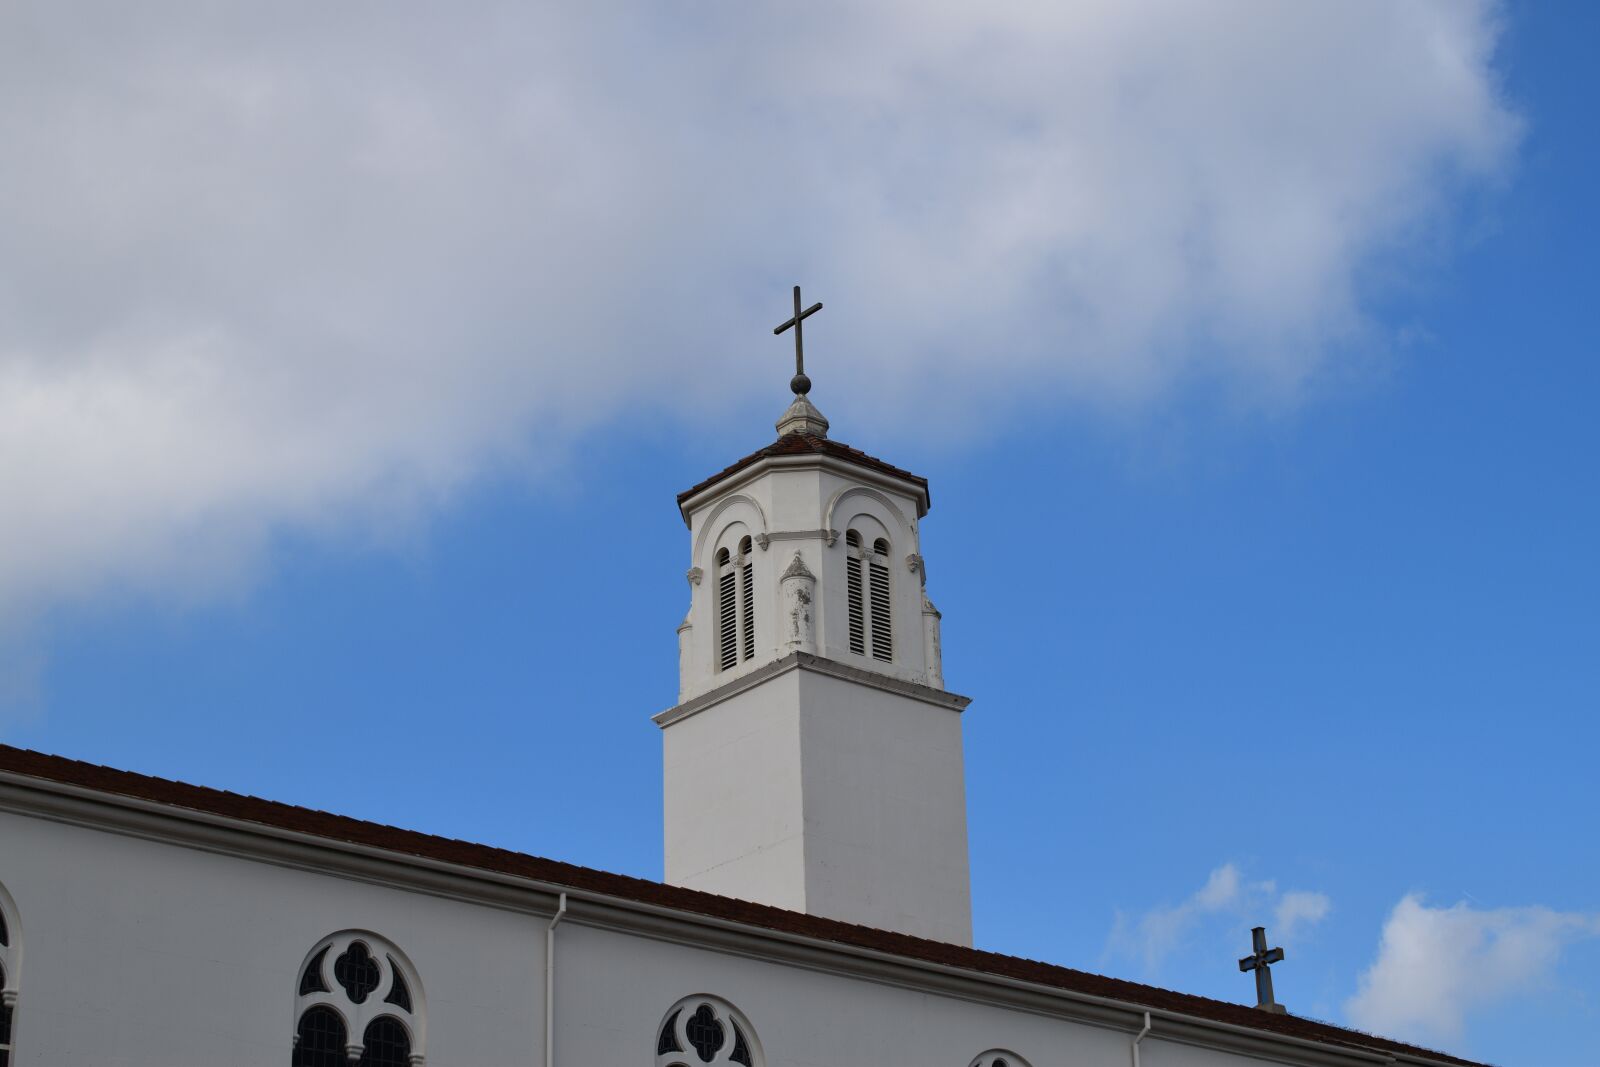 Nikon D3500 sample photo. Church, tower, architecture photography